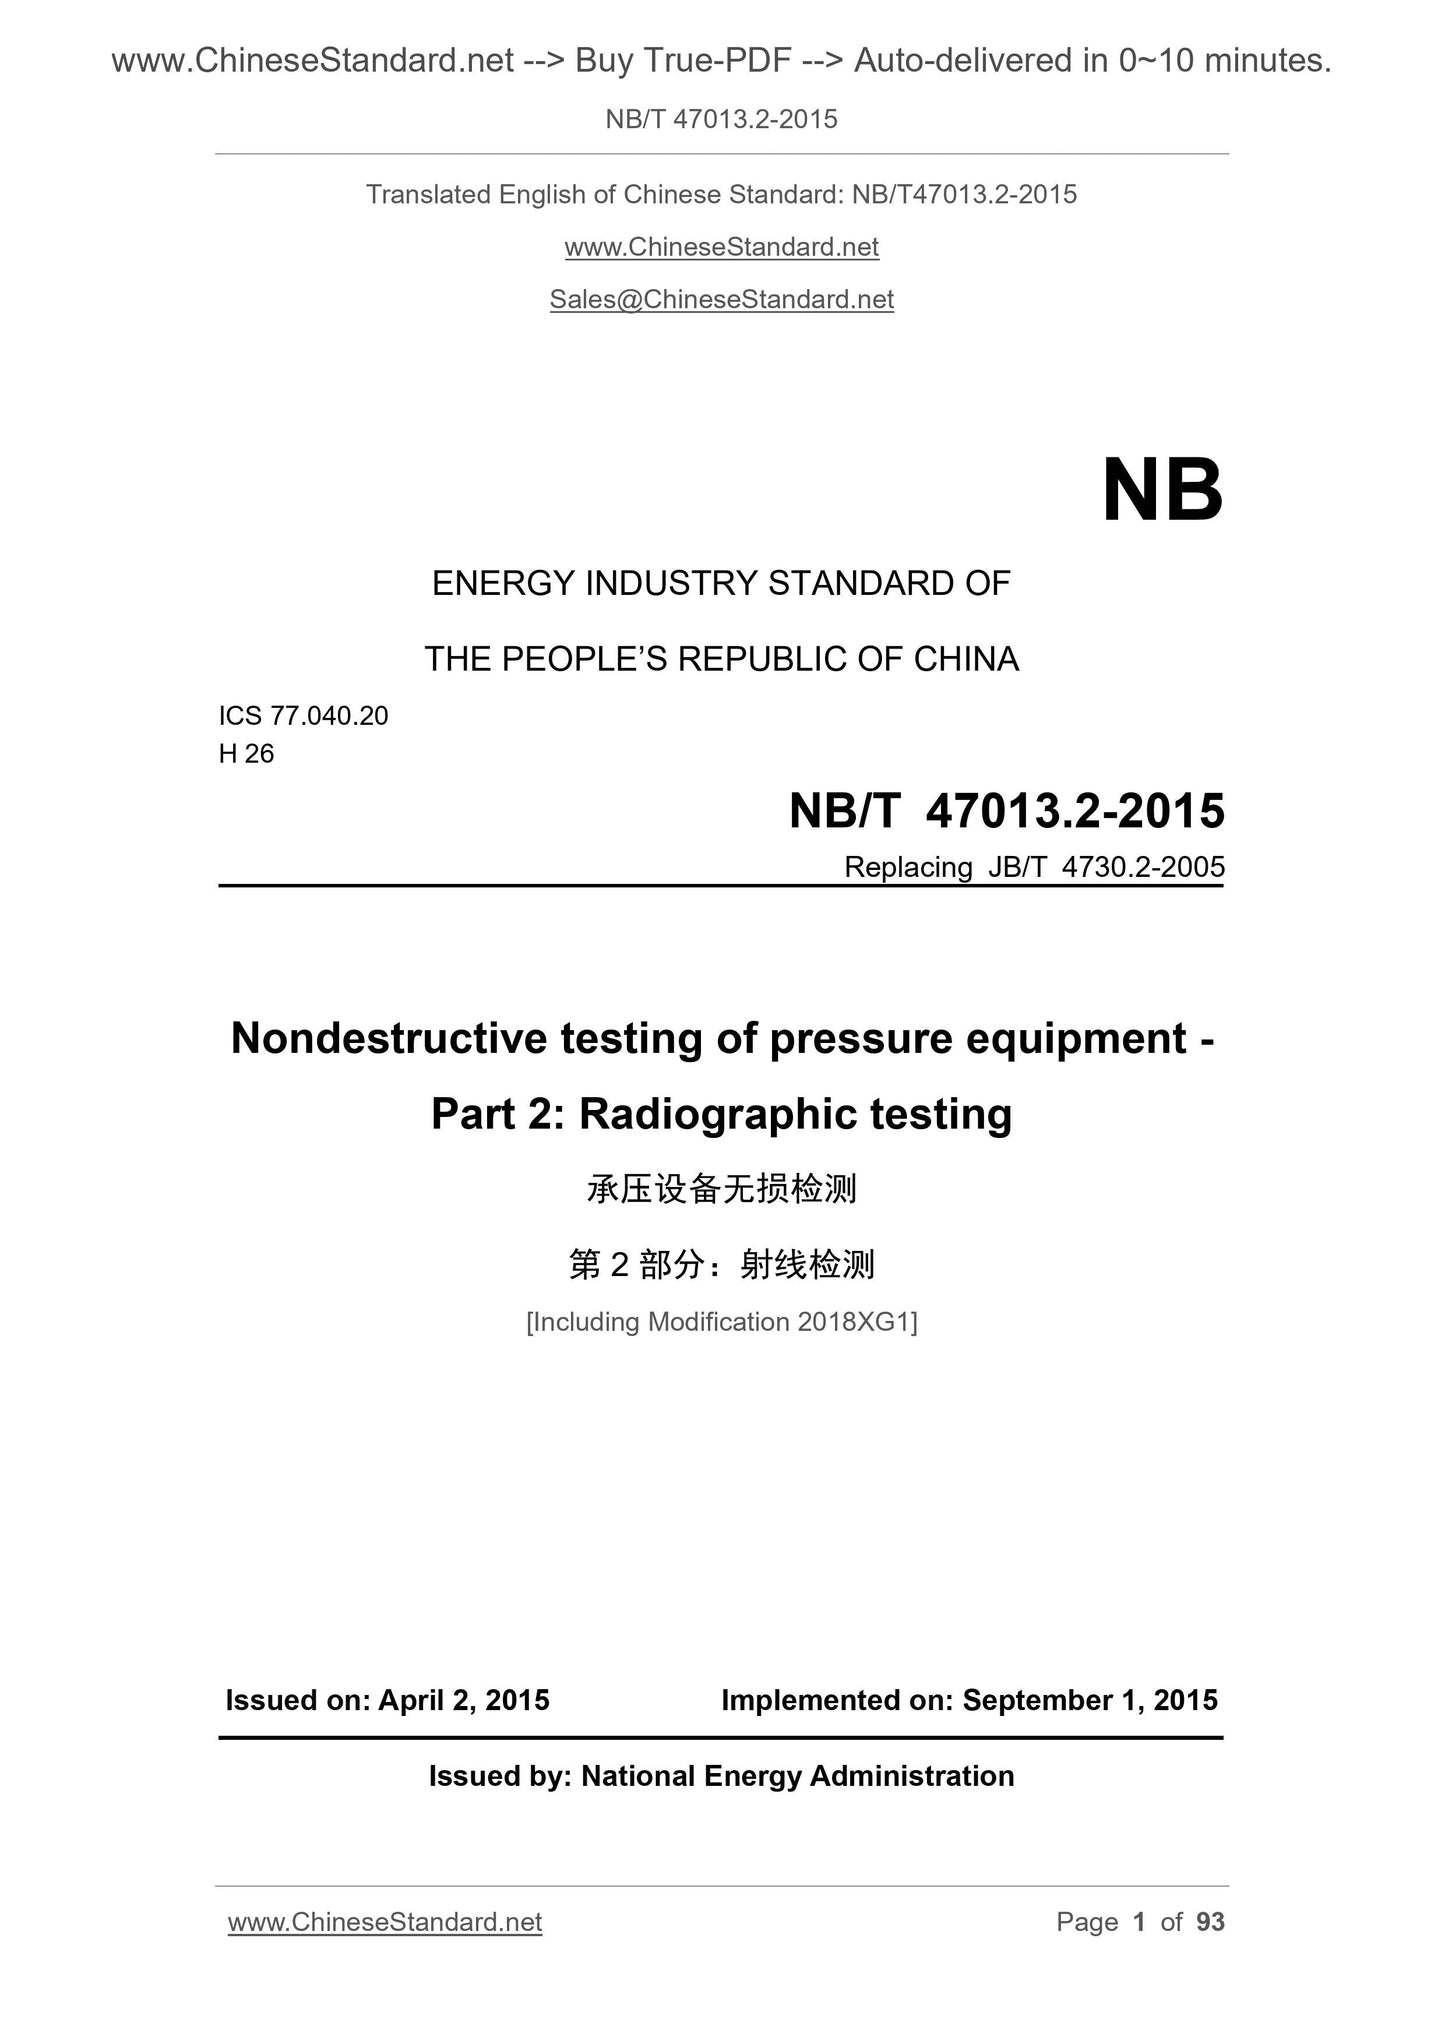 NB/T 47013.2-2015 Page 1